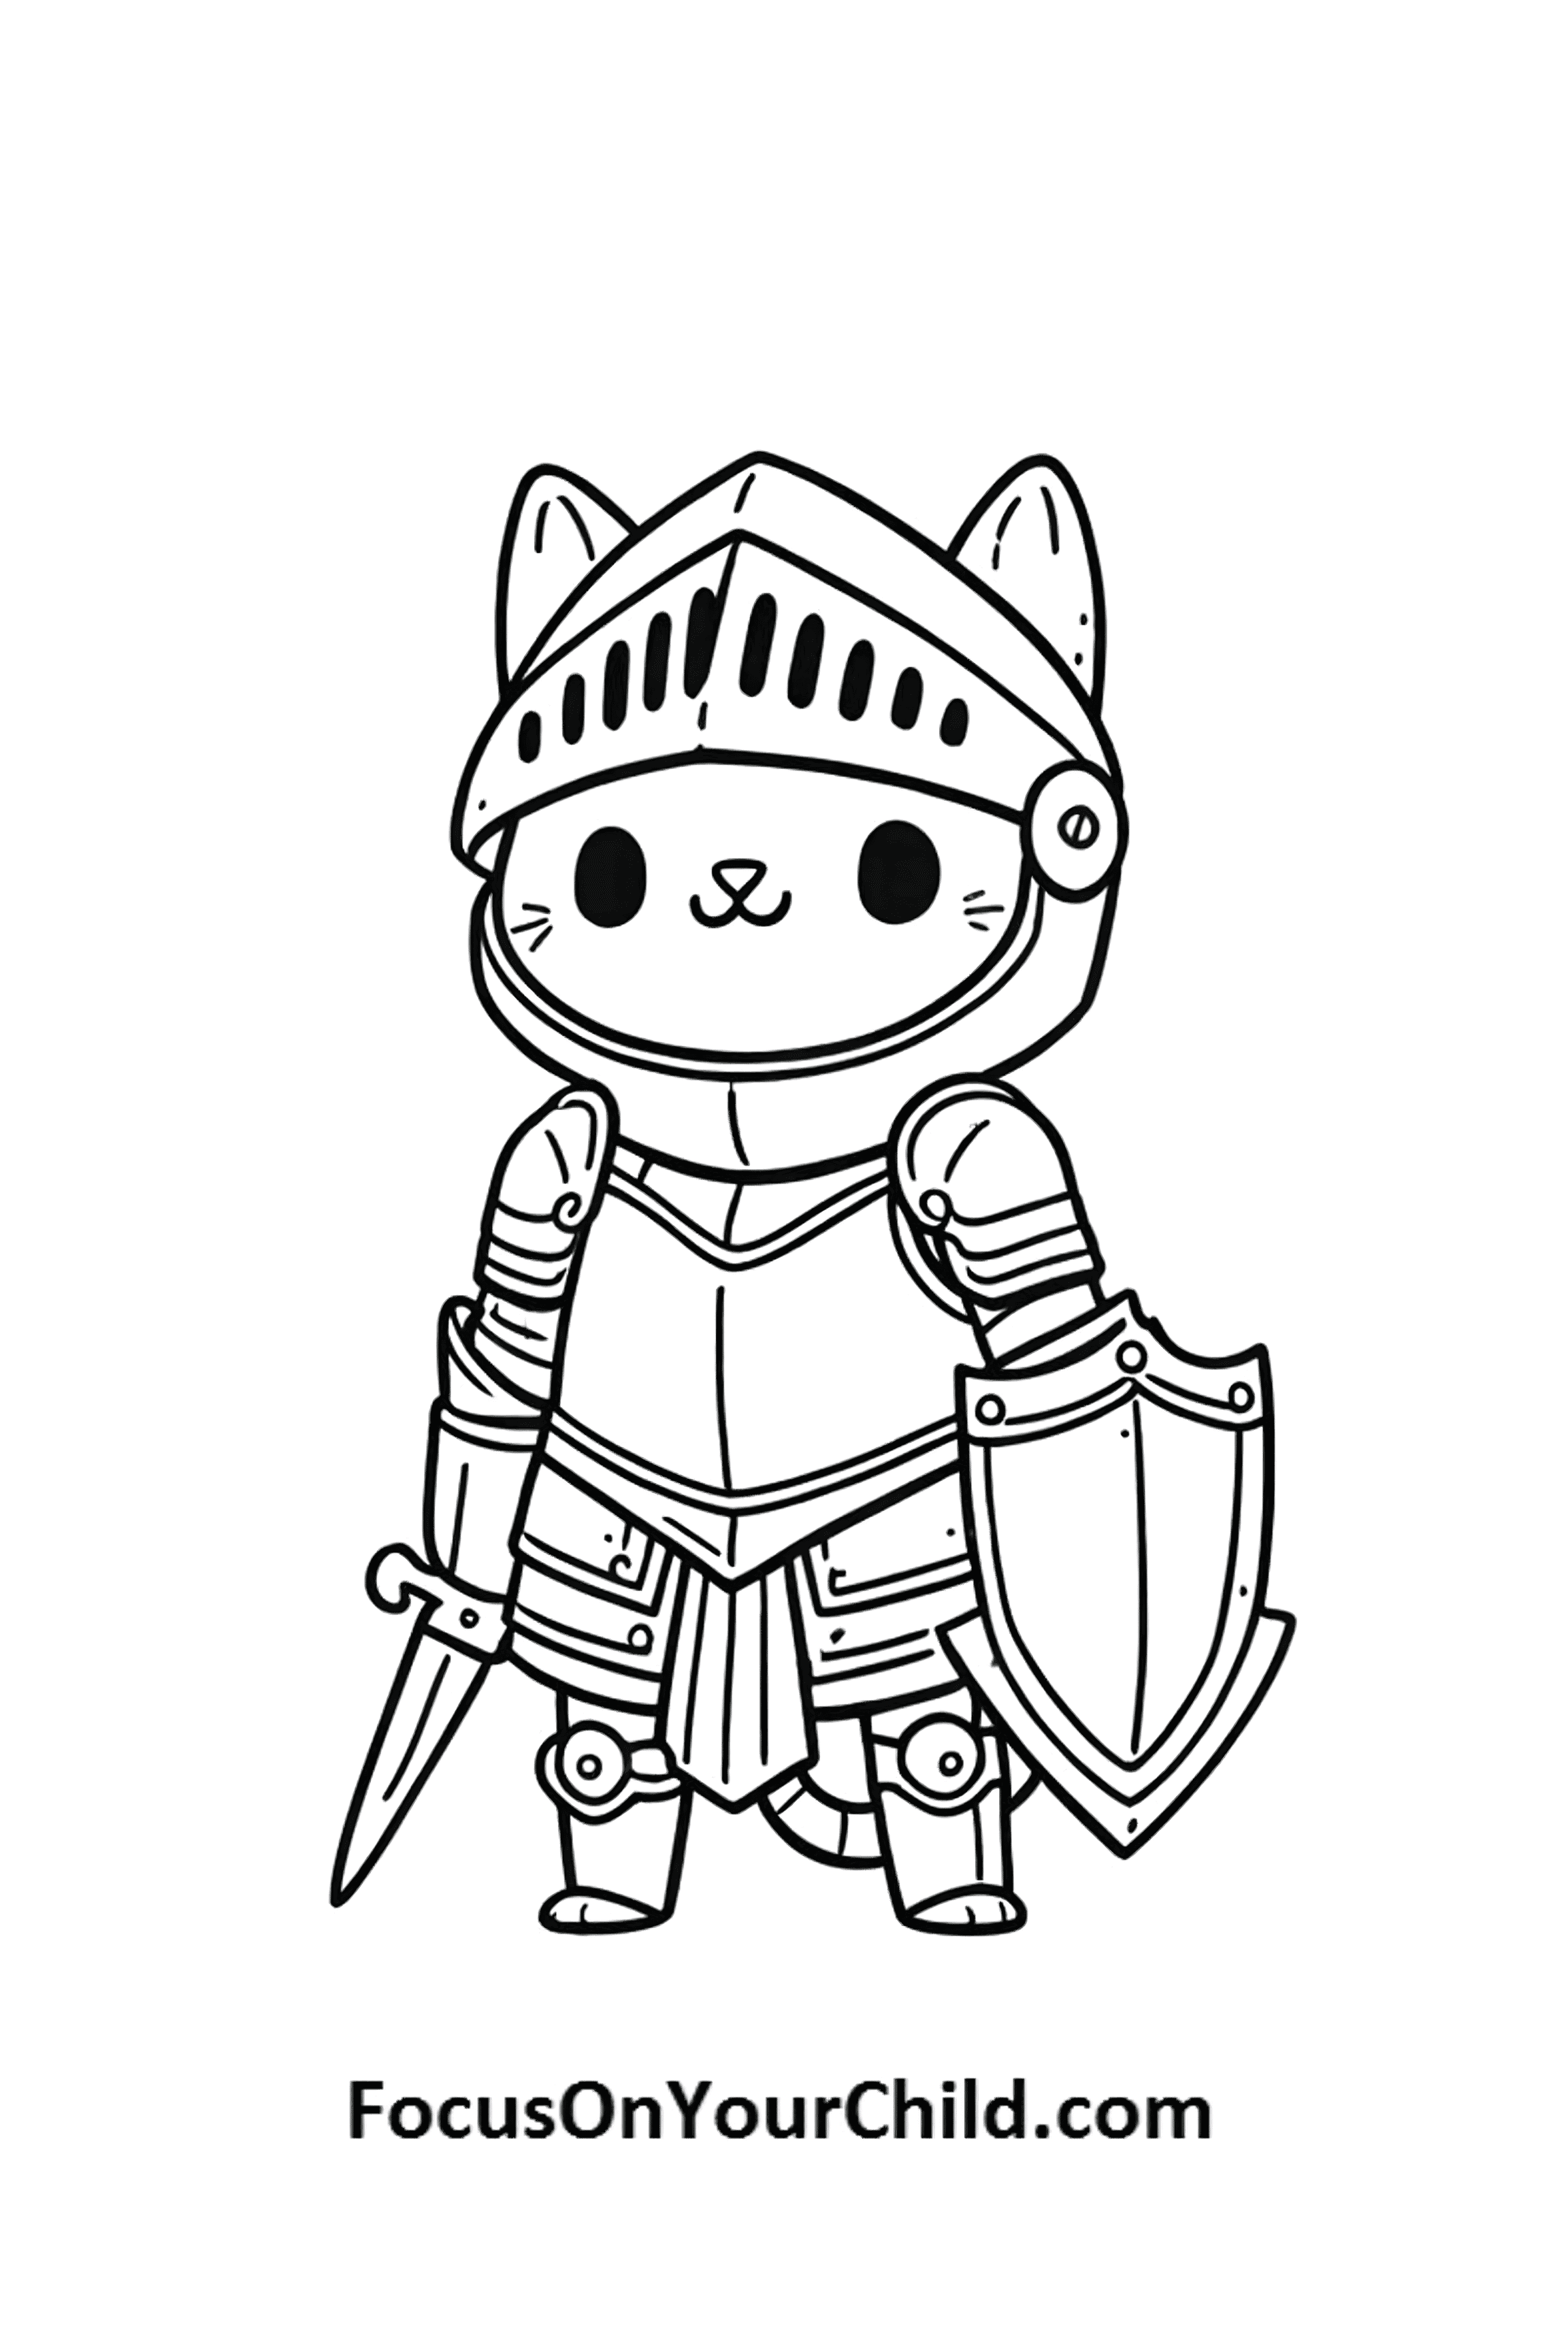 Adorable cat dressed as a knight in whimsical black-and-white illustration.